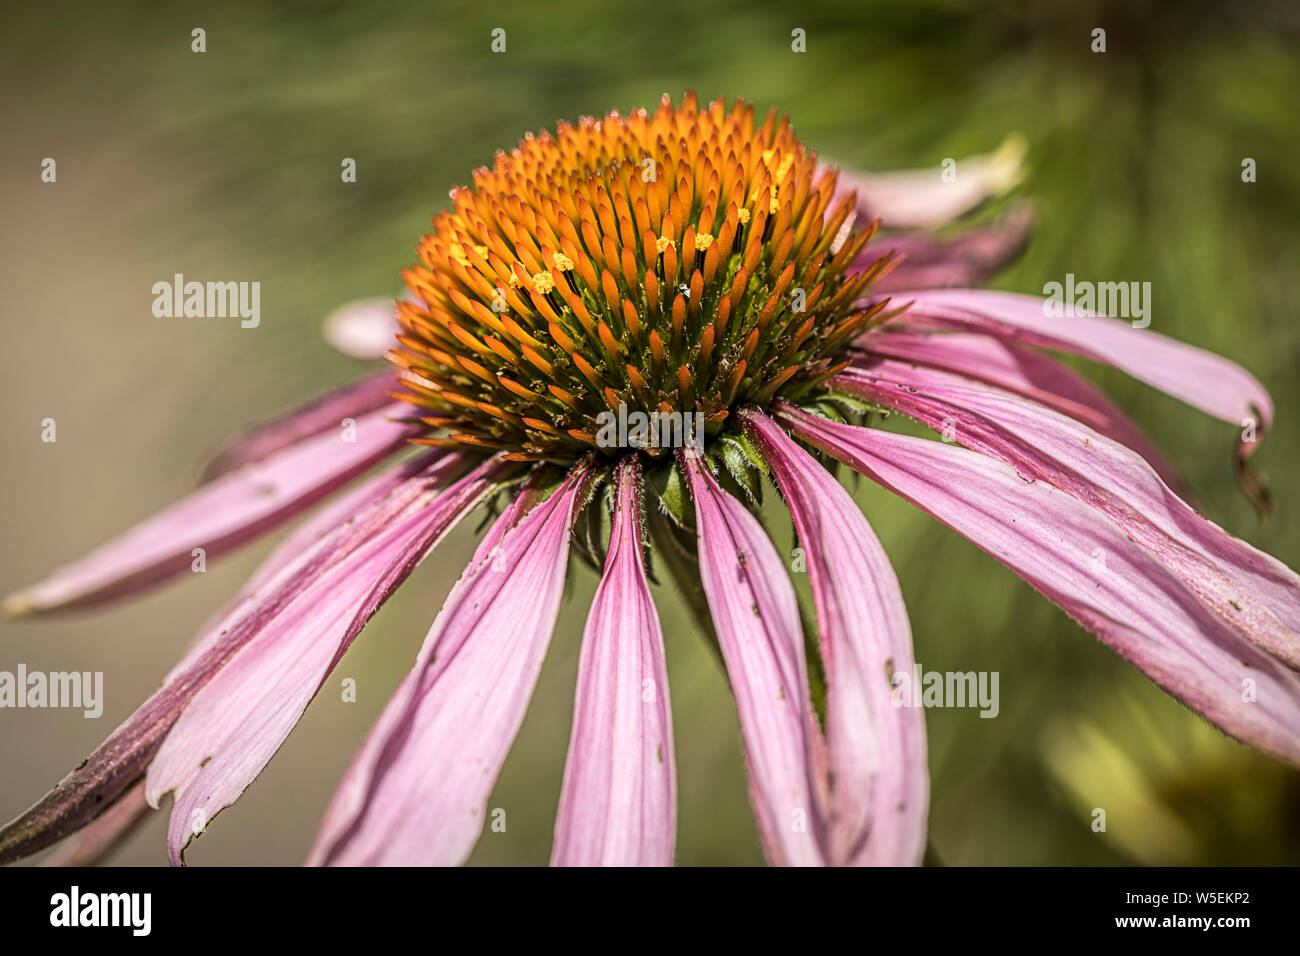 A close up photo of a delicate purple coneflower in a garden. Stock Photo